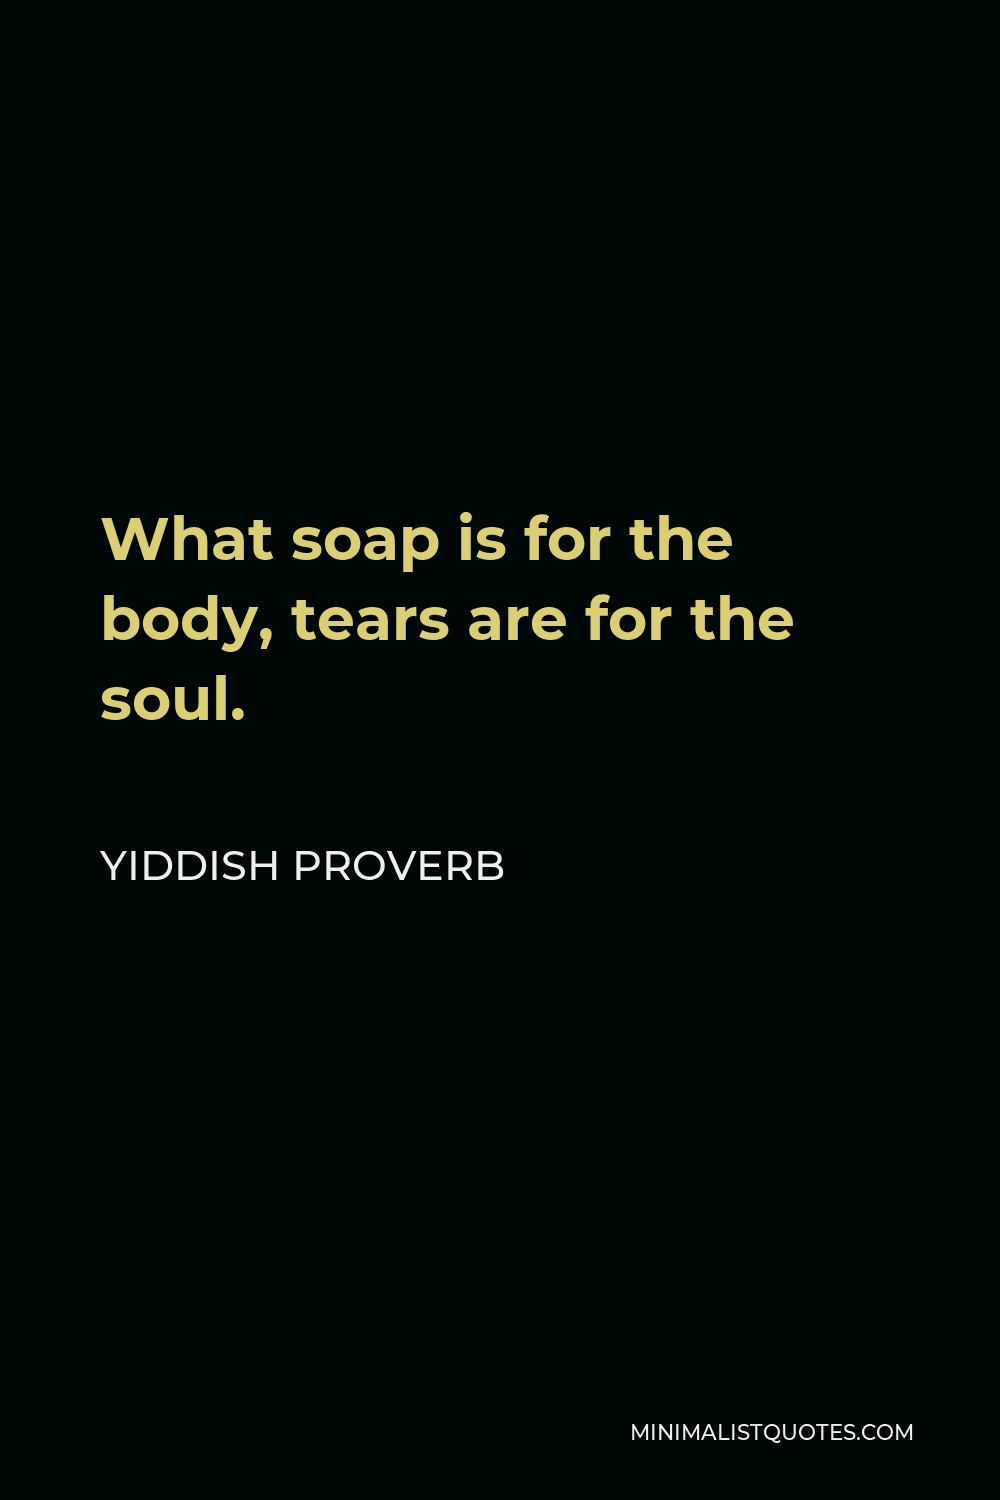 Yiddish Proverb Quote - What soap is for the body, tears are for the soul.